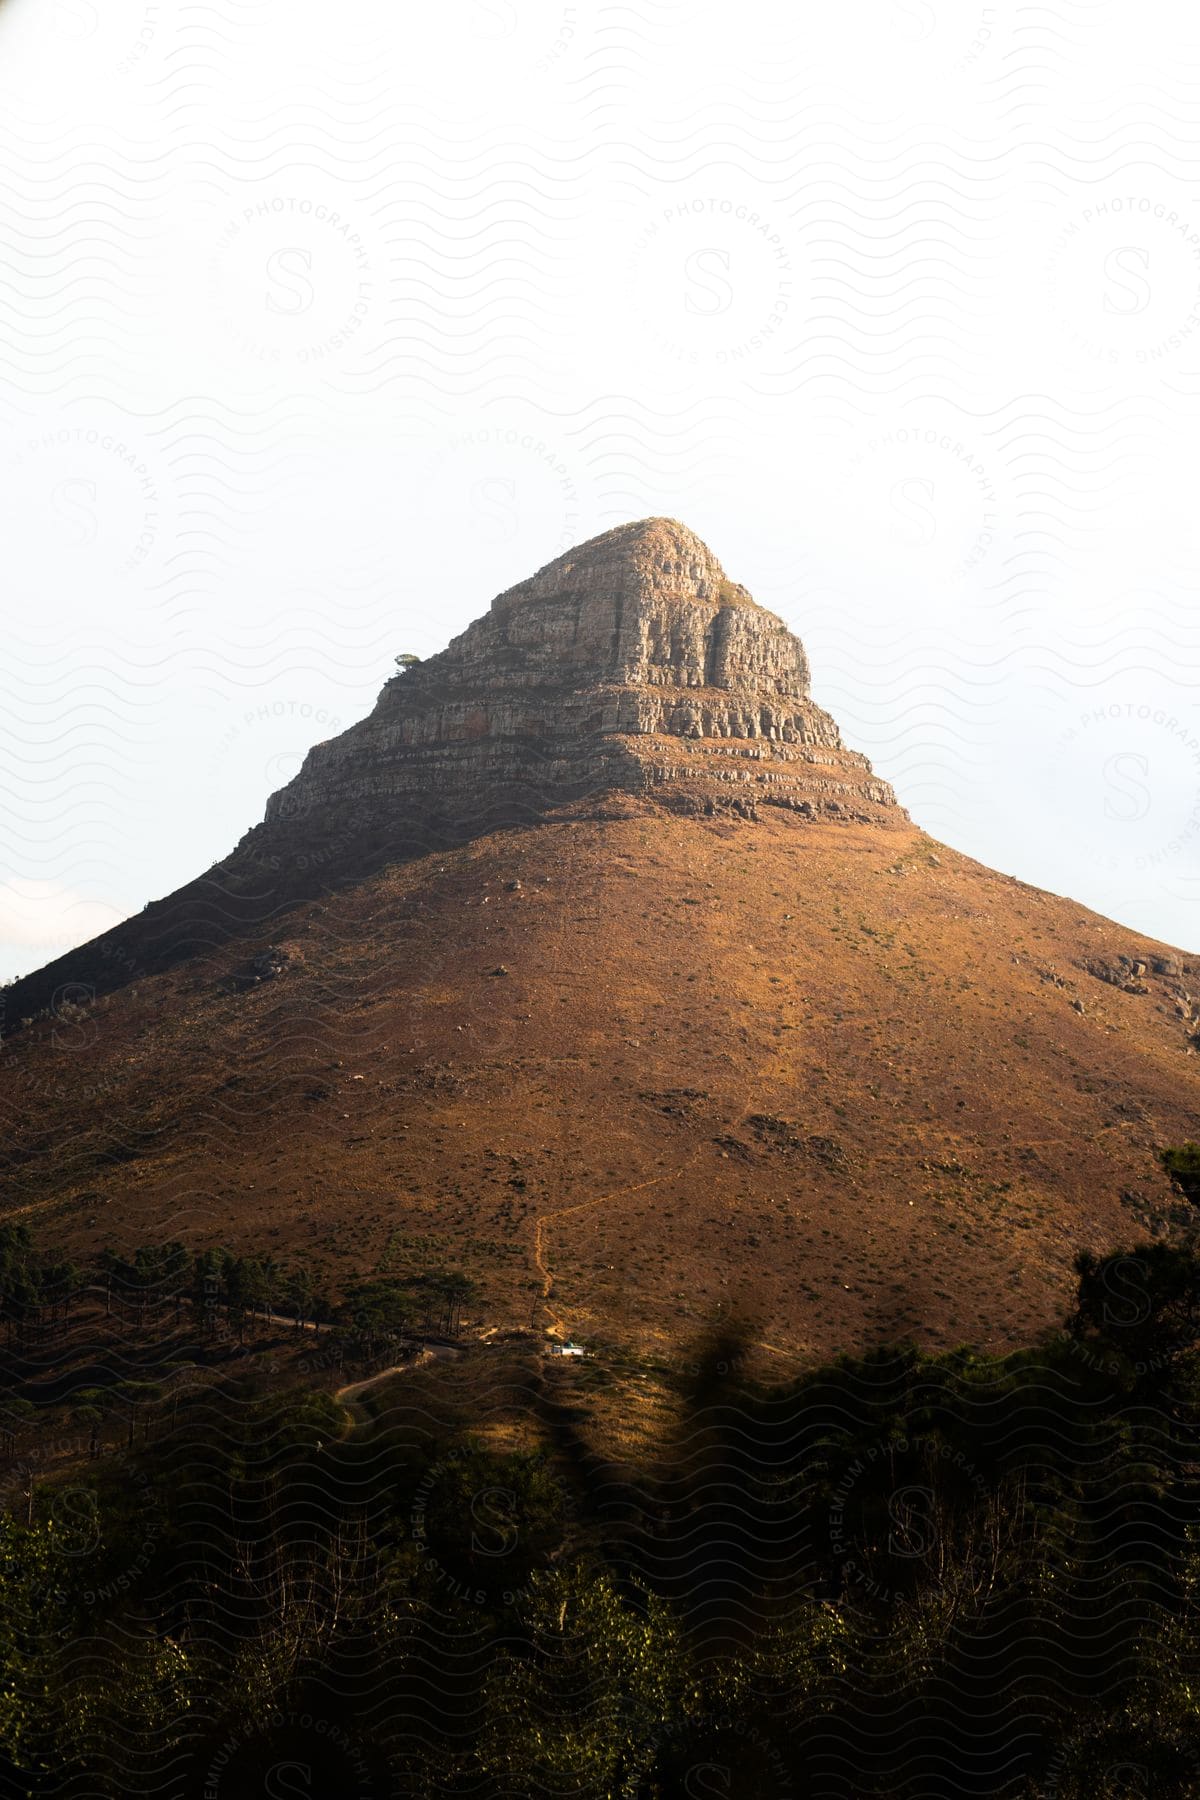 A mountain peak with a pointed shape stands against a clear sky